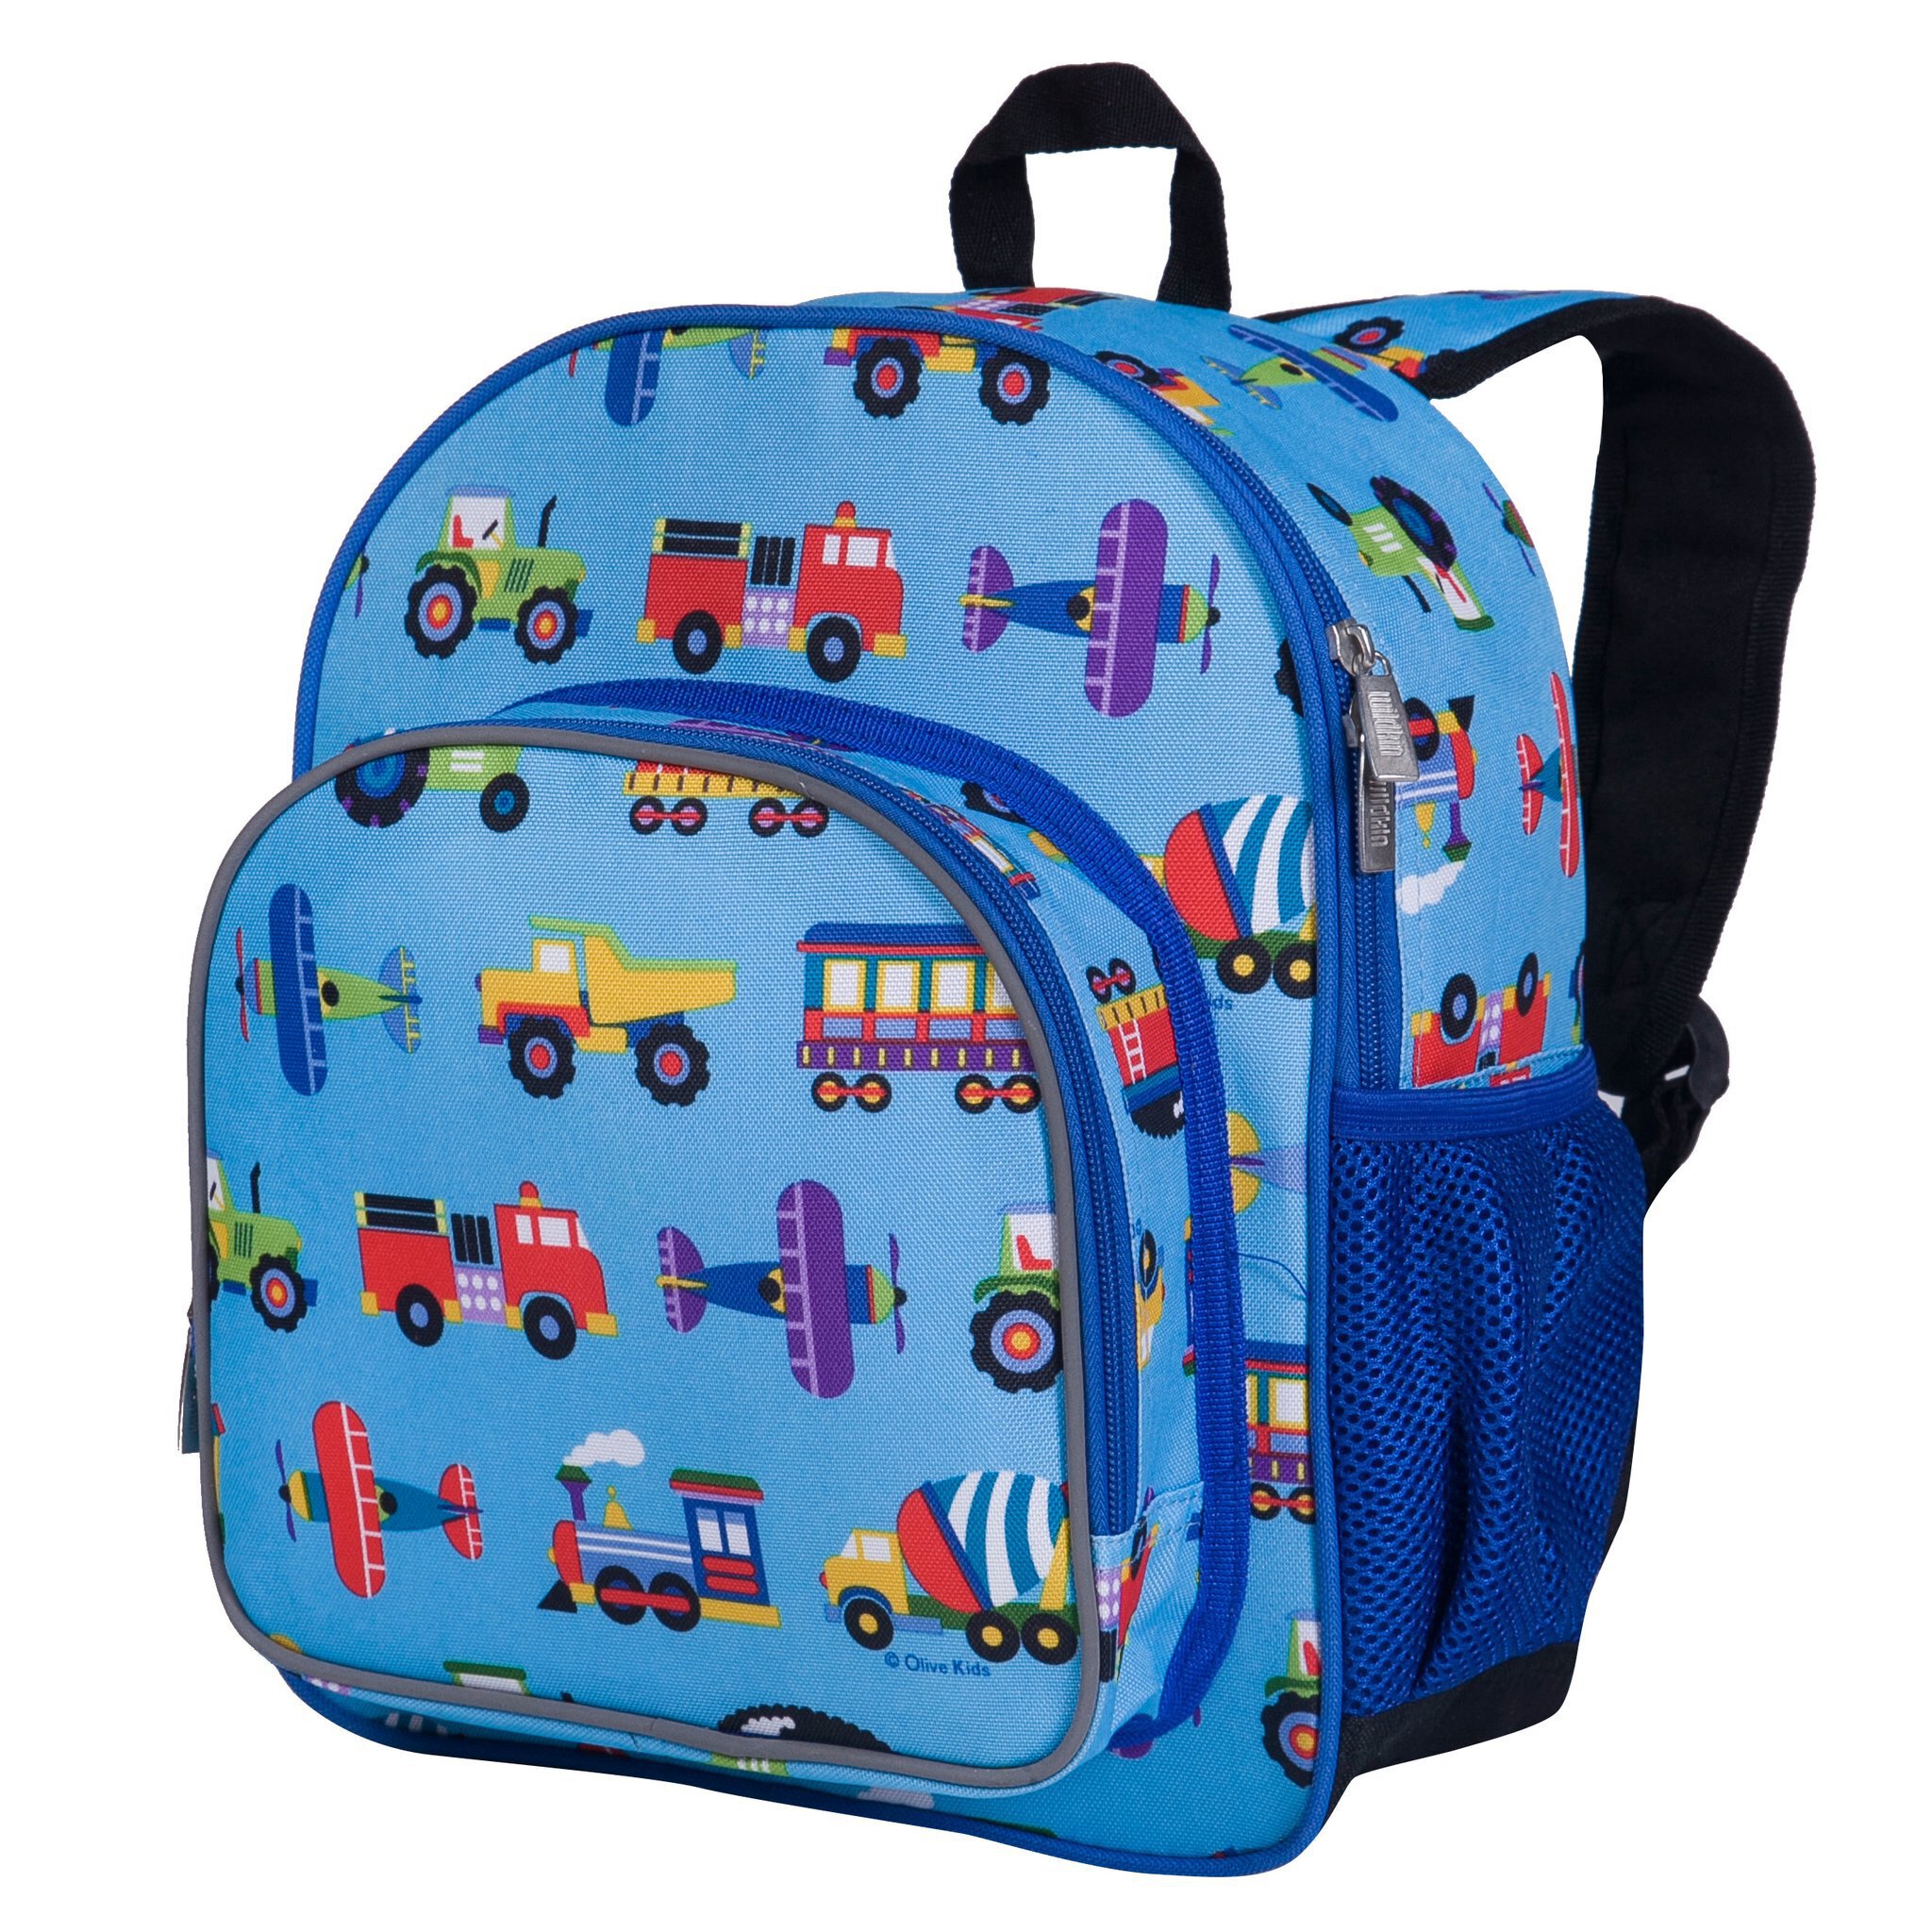 Wildkin Kids 12 Inch Backpack for Toddler Boys and Girls, Insulated Front Pocket (Trains, Planes & Trucks Blue) - image 1 of 5